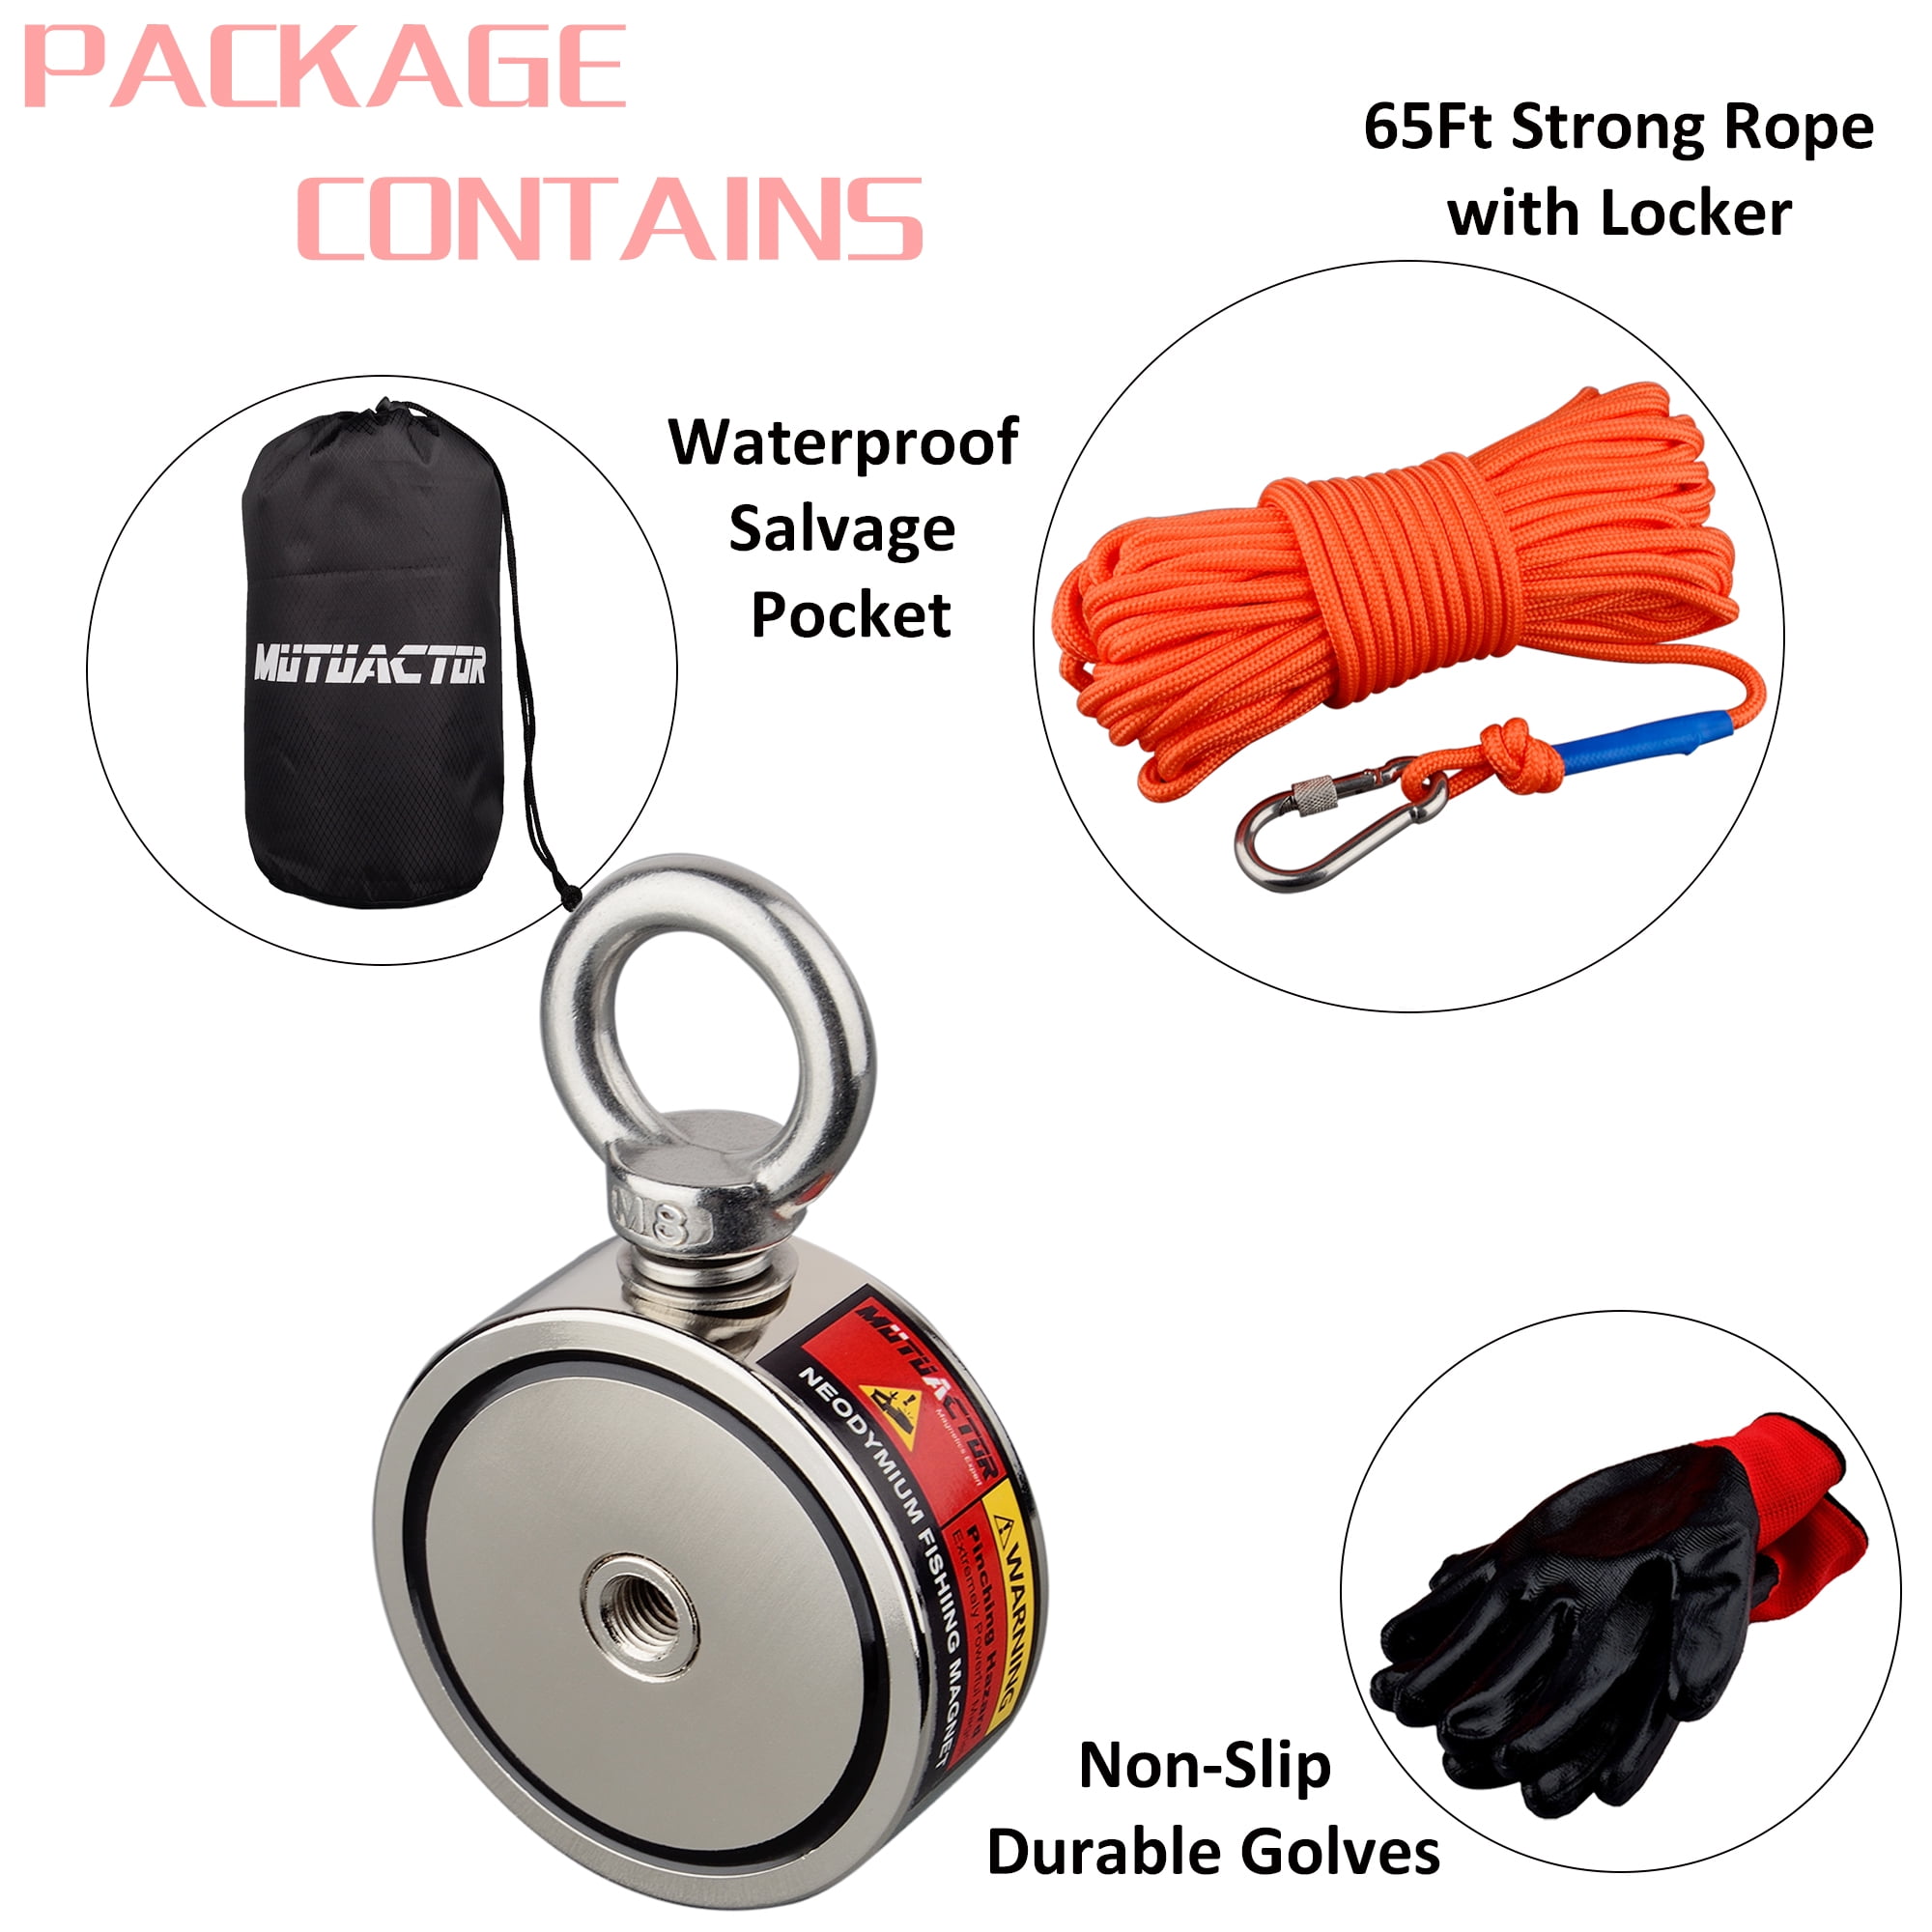 MUTUACTOR Double Sides 880Ib Fishing Magnet Kit with 66Ft Rope, Find  Treasure in the River 